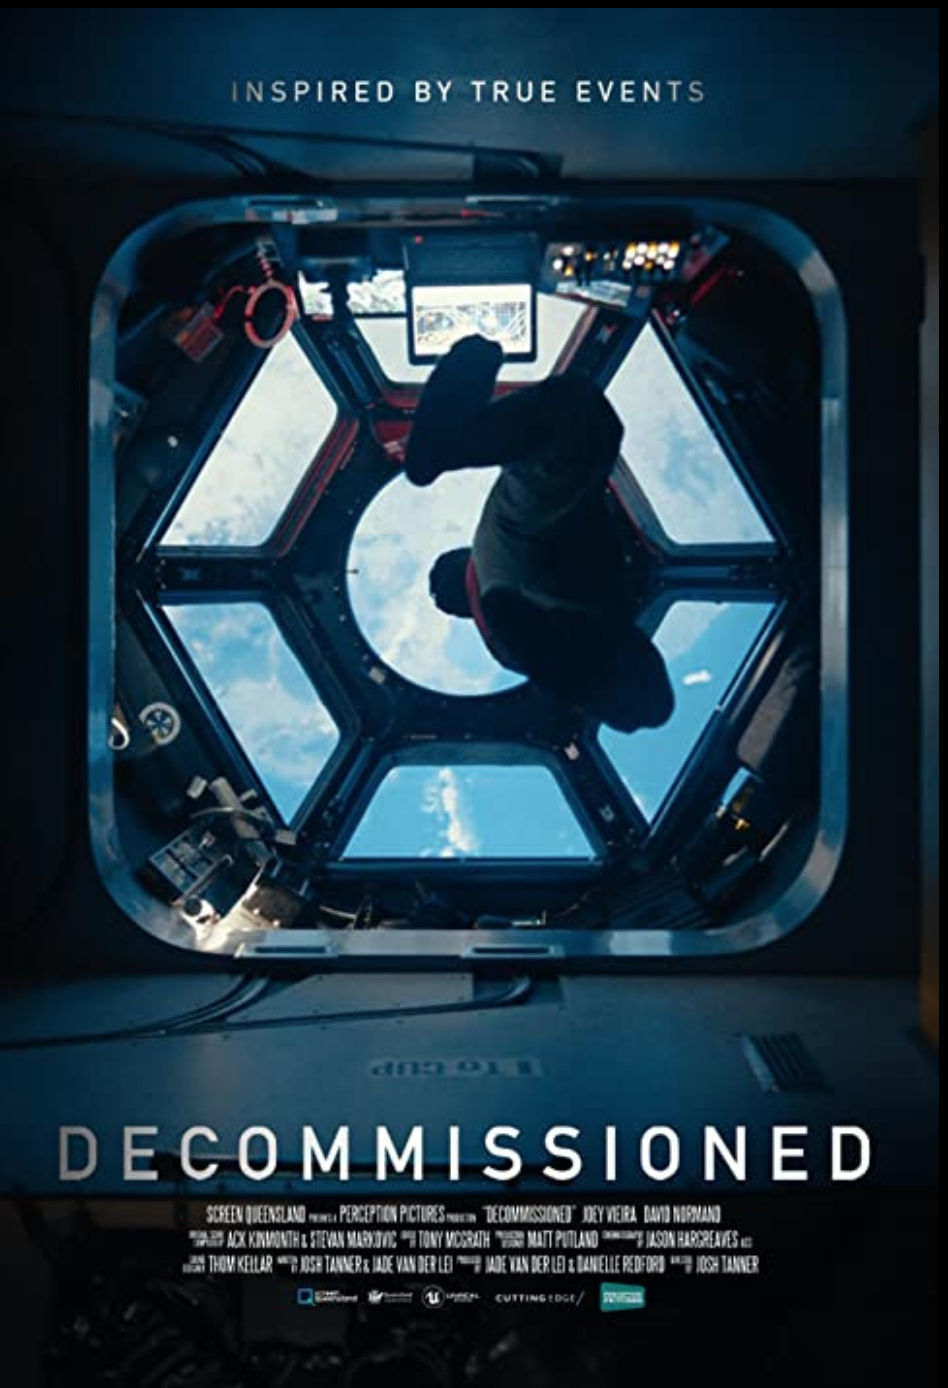 DECOMMISSIONED